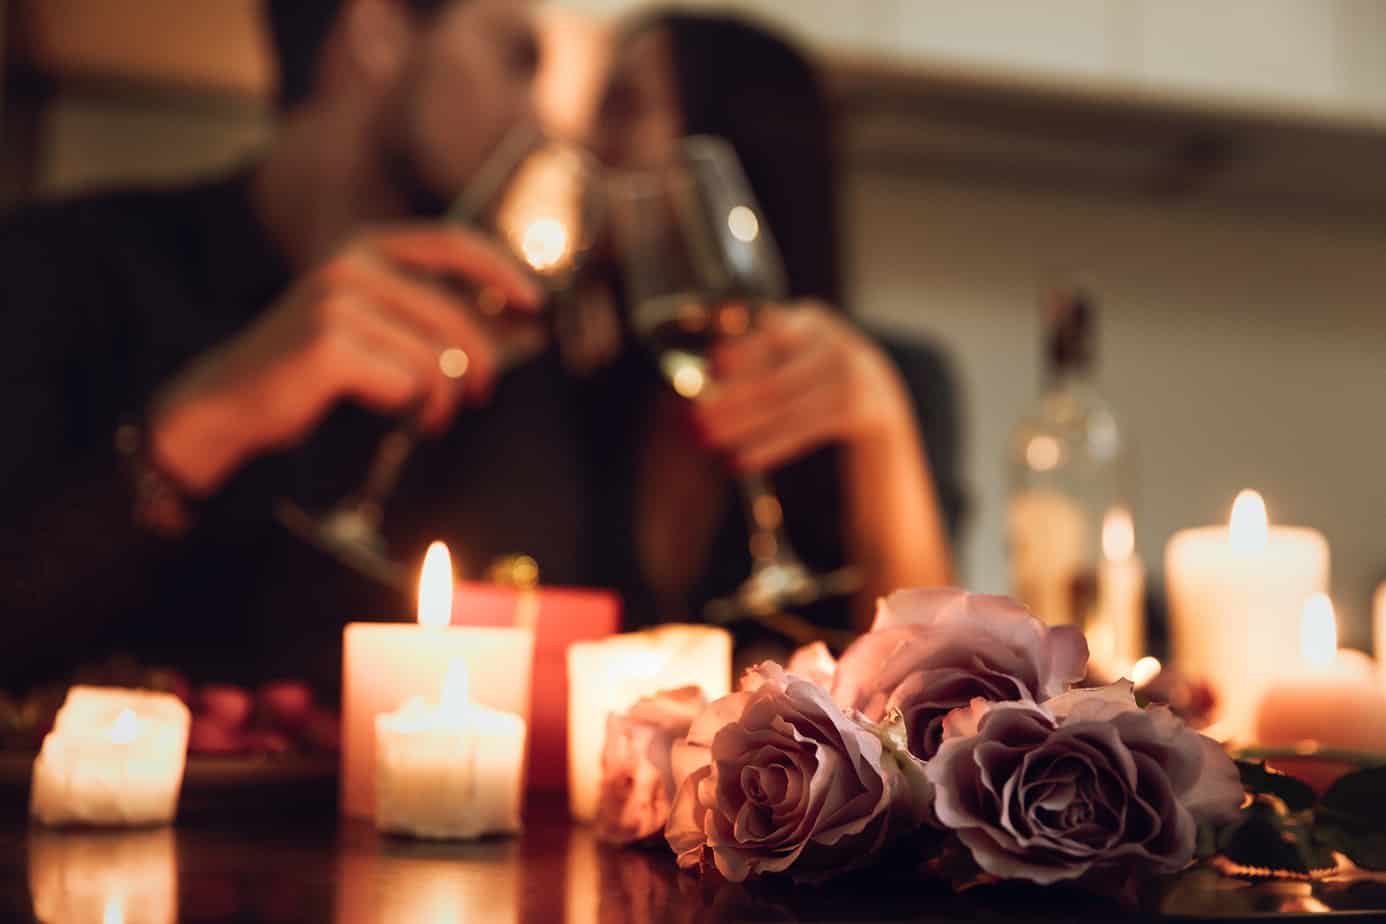 How to Have a Romantic Evening with My Partner